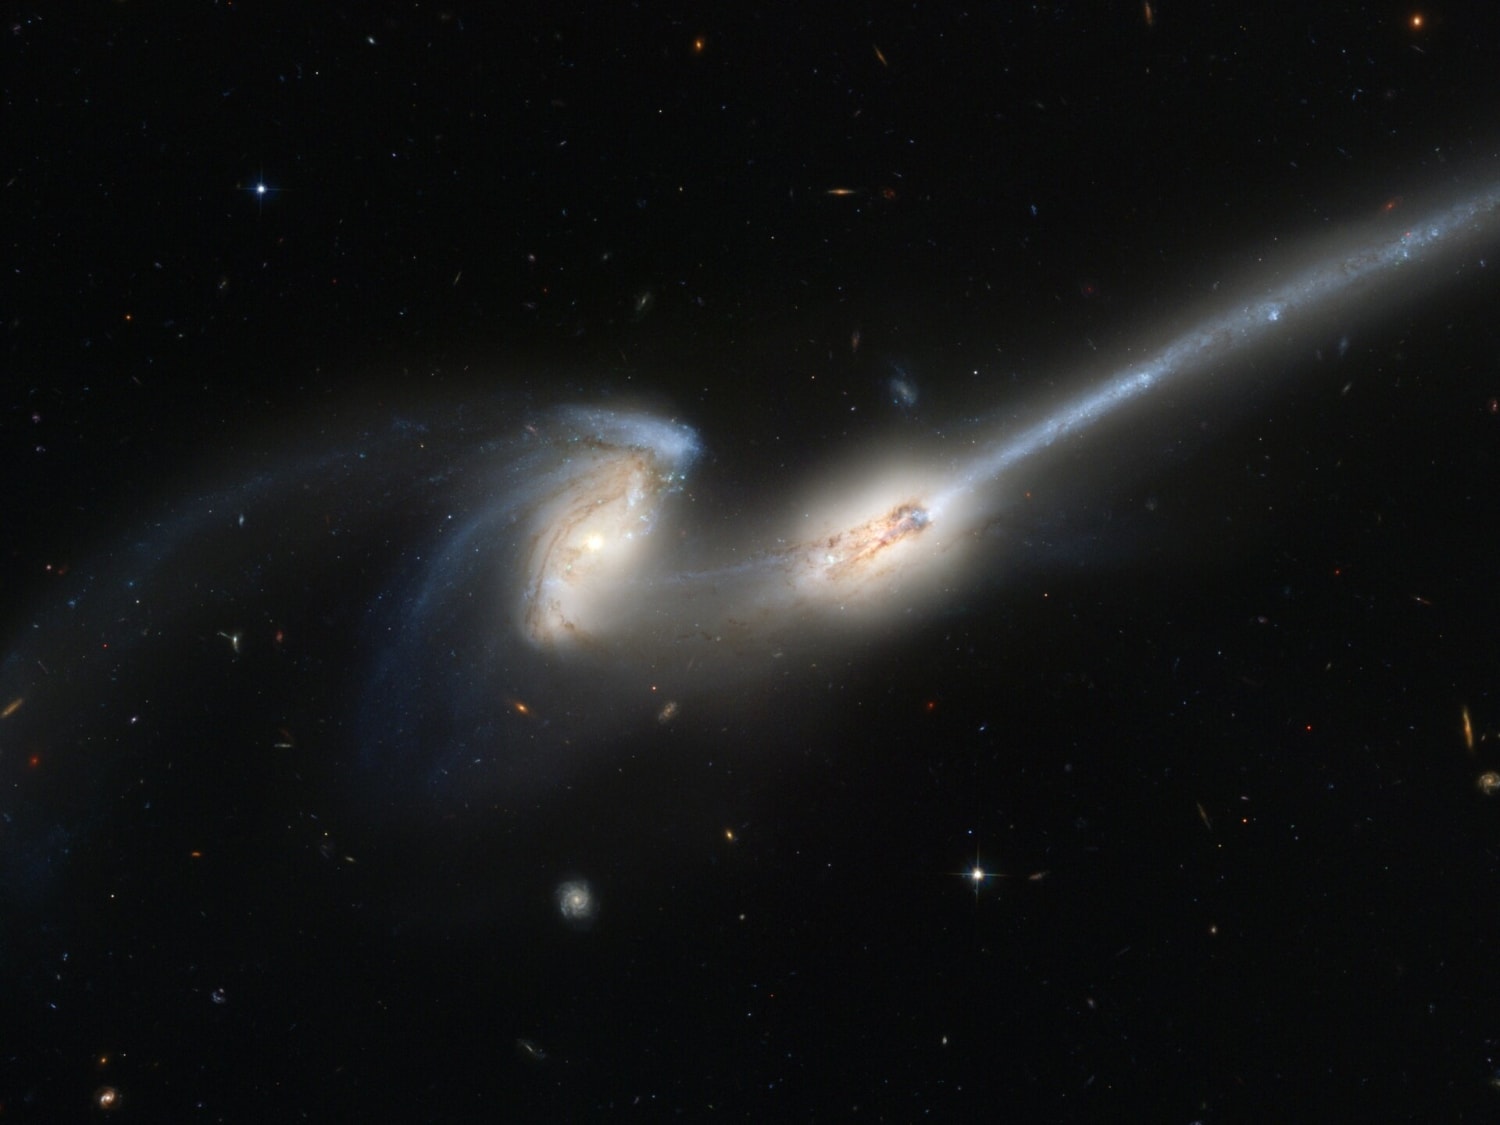 Mergers between galaxies trigger activity in their core